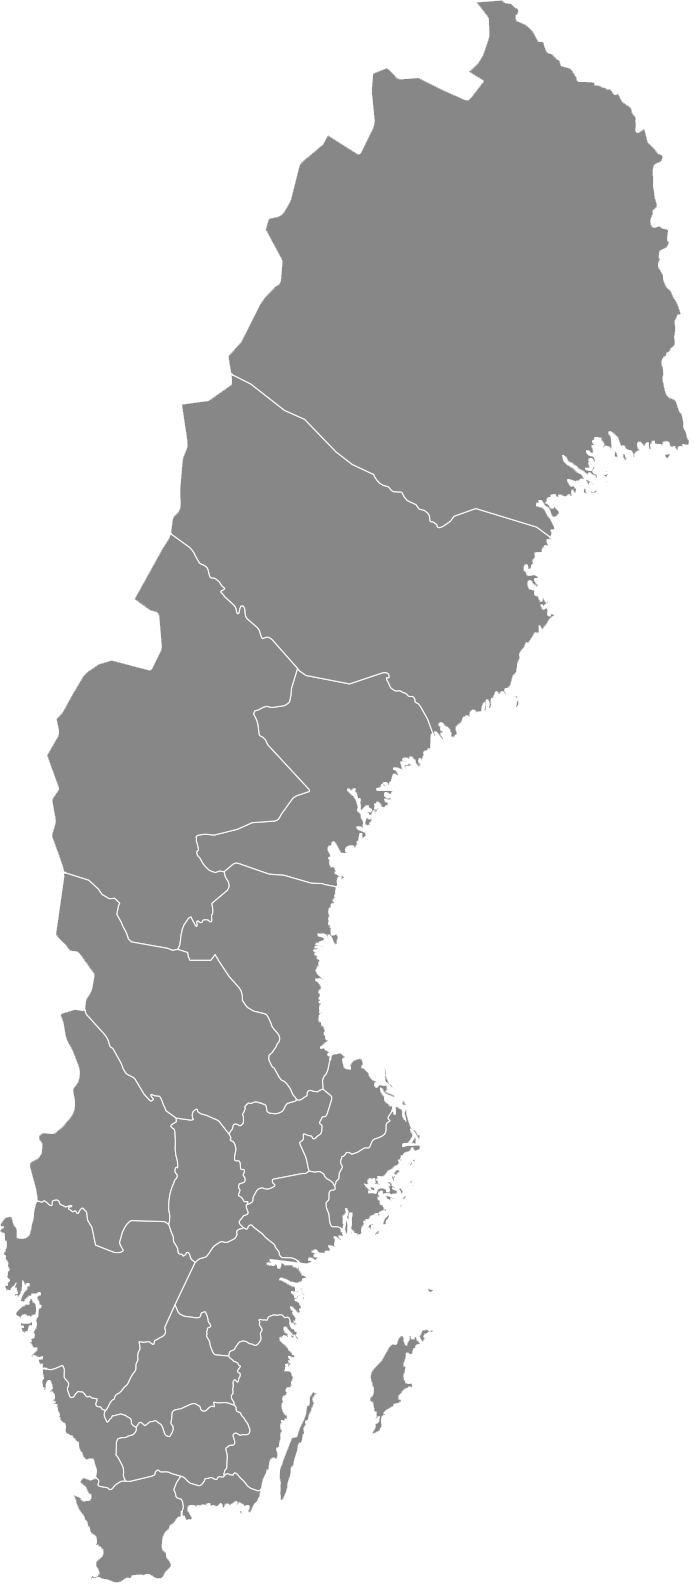 a single map of Sweden